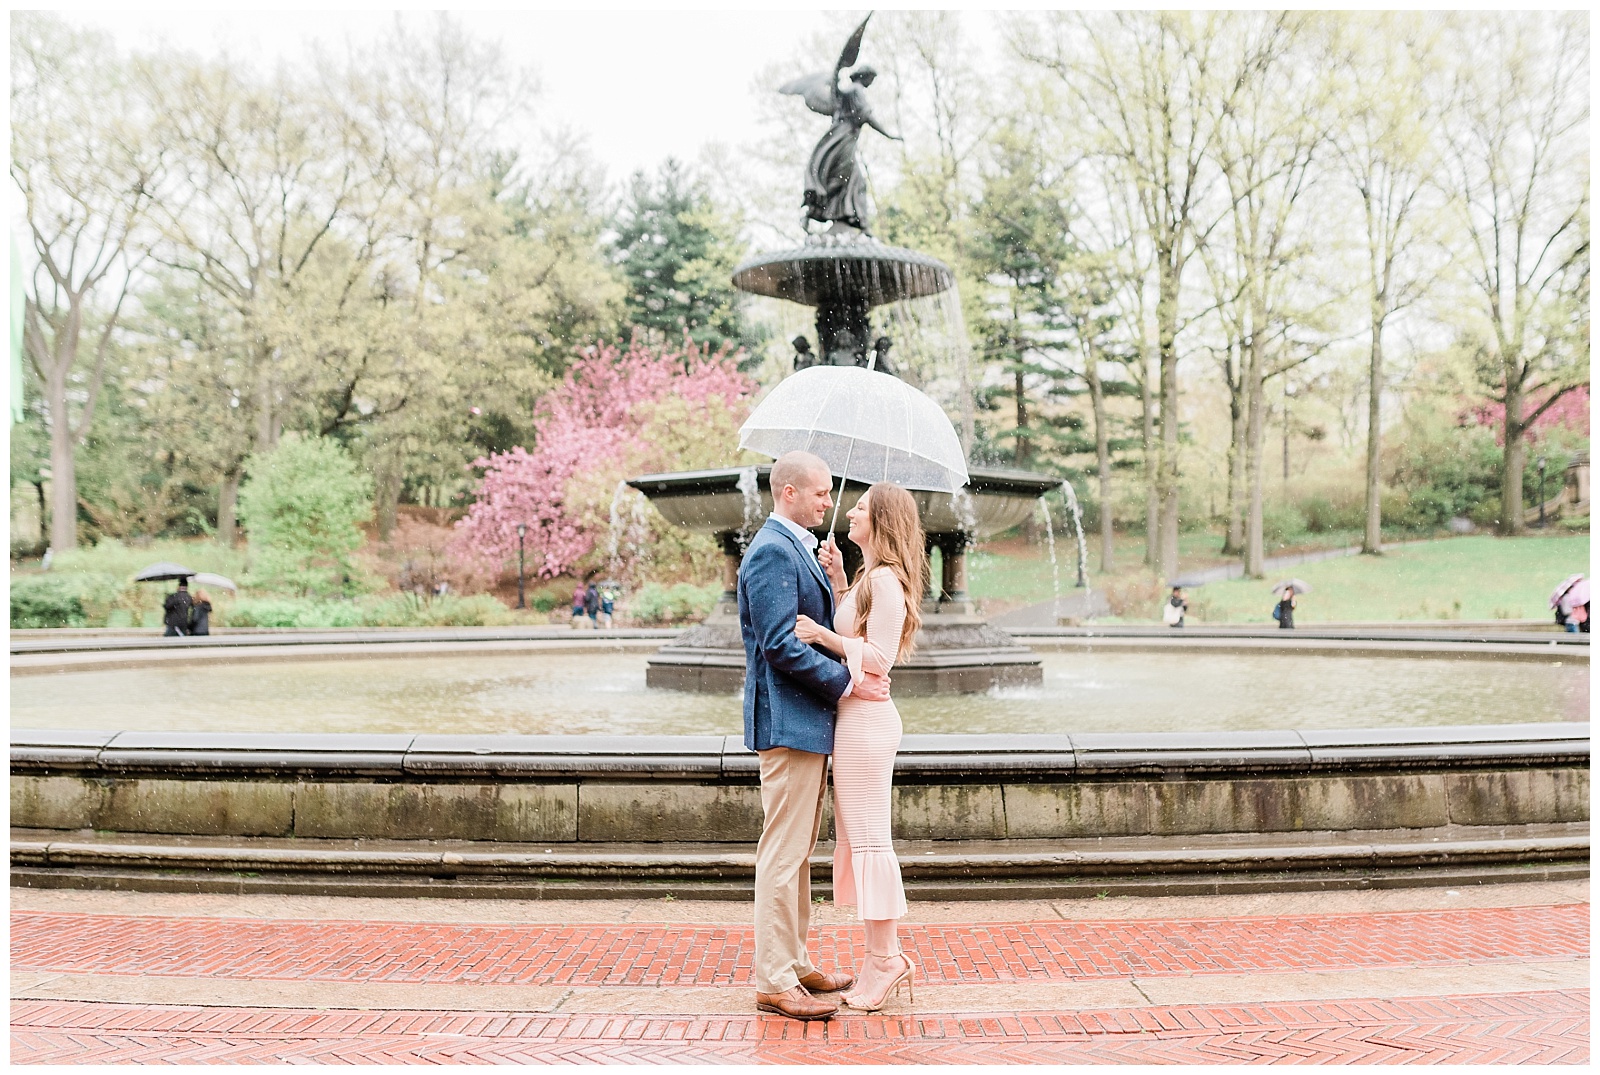 A couple smiles at each other while sharing an umbrella in front of Bethesda Fountain in Central Park.